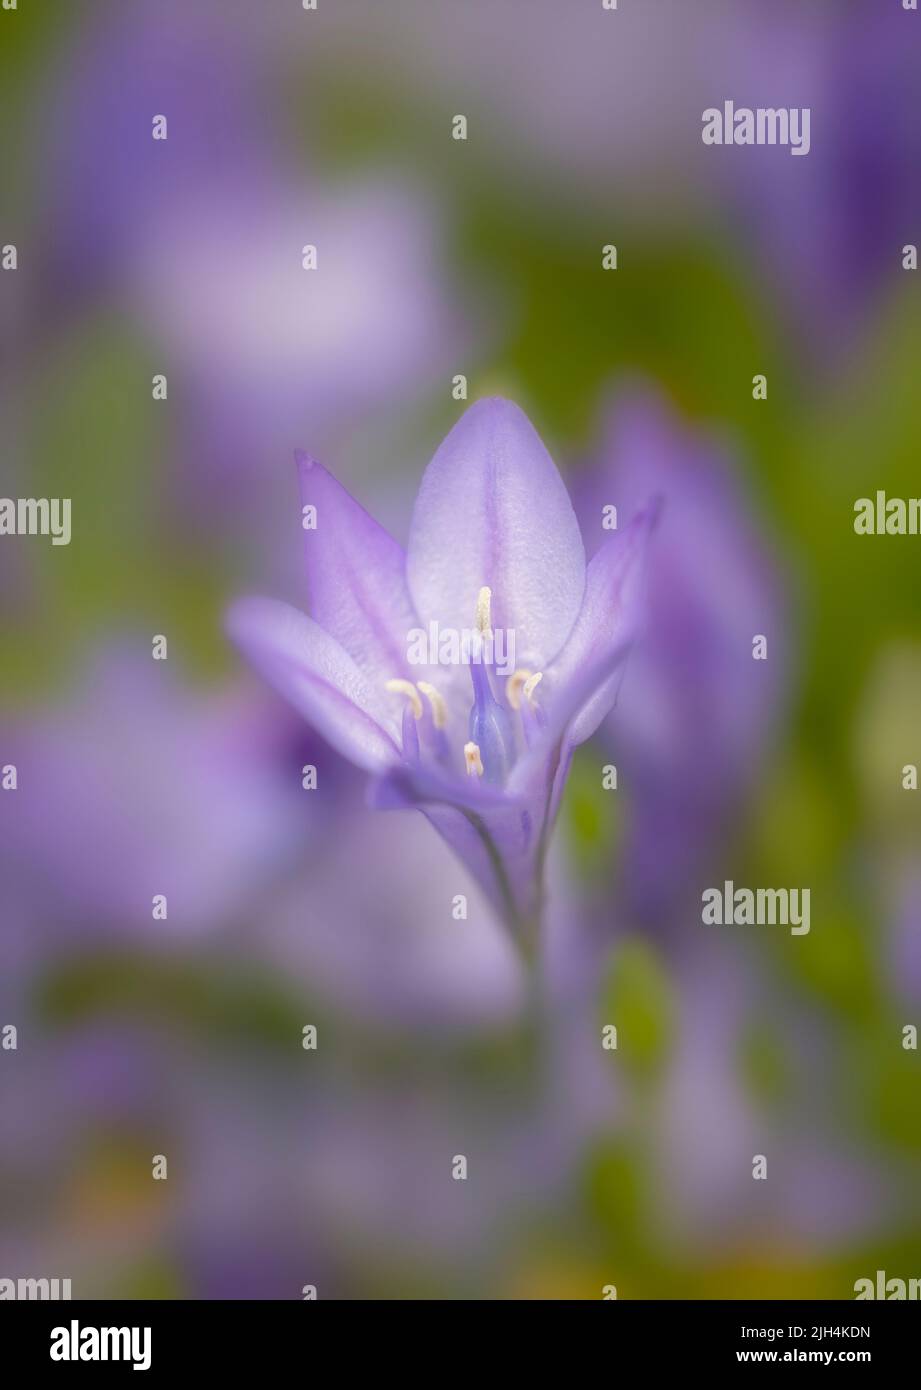 A beautiful dwarf Agapanthus flower standing out from a soft, out of focus background Stock Photo